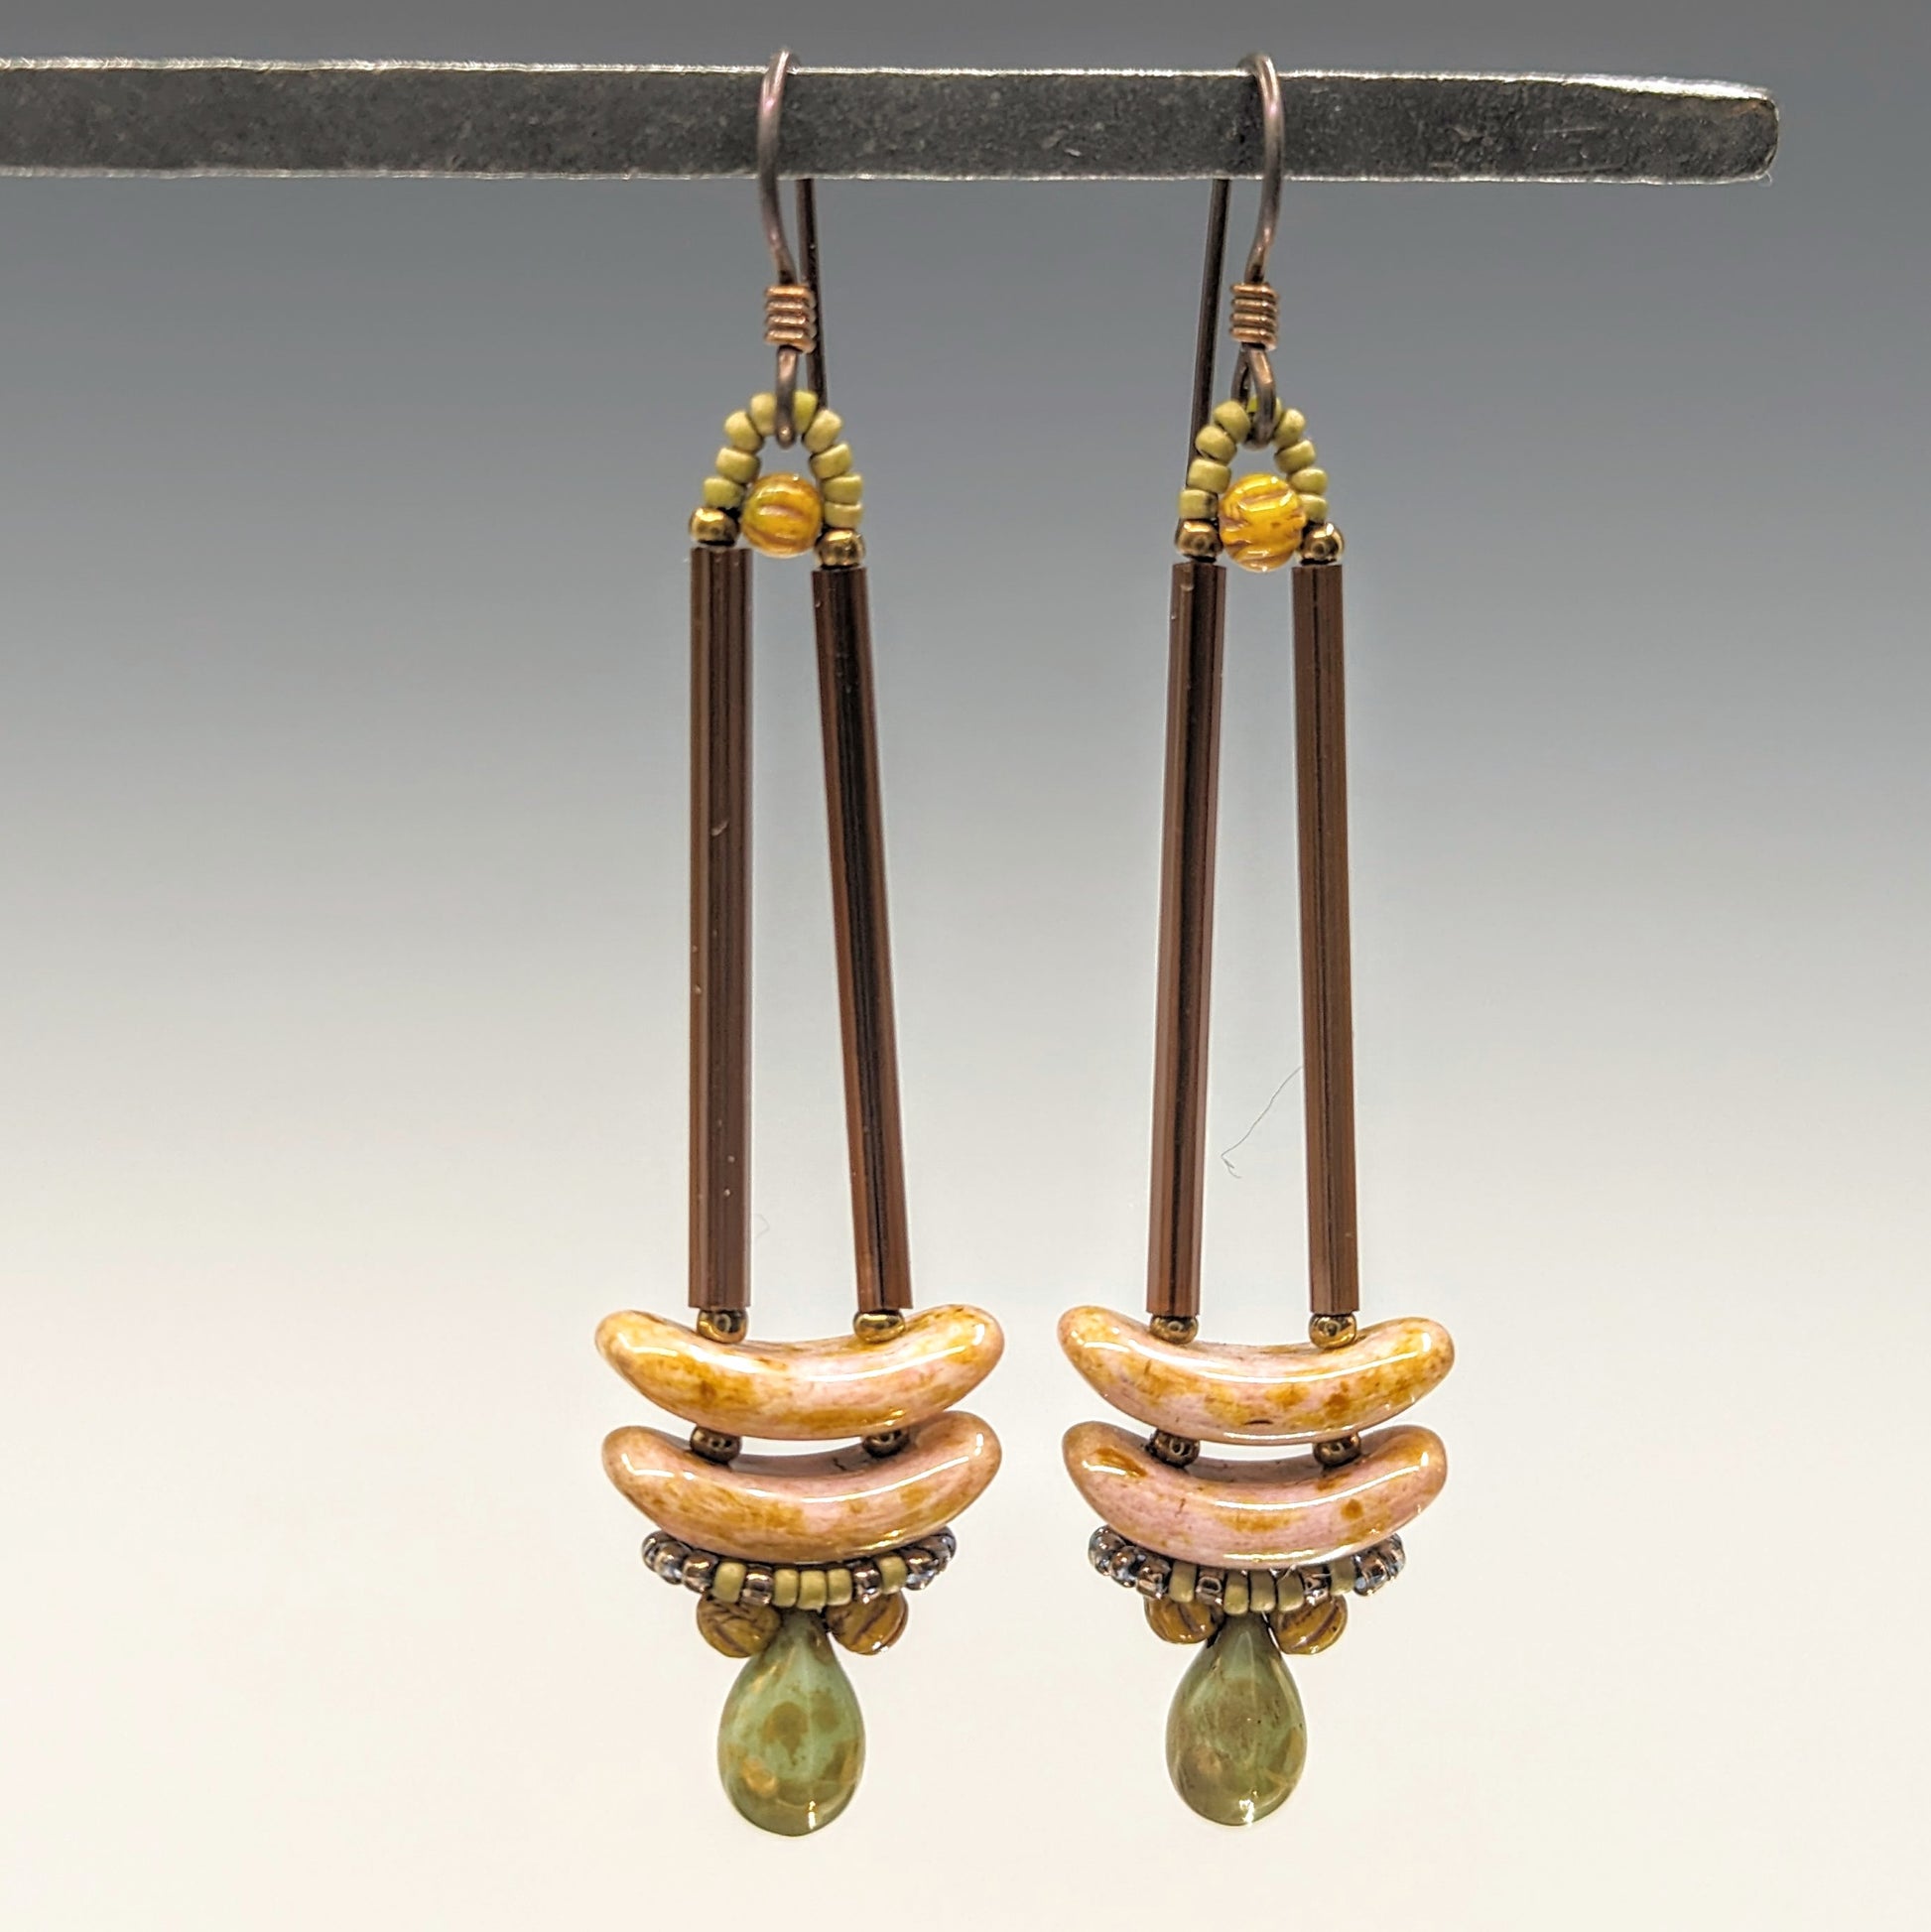 Earrings that look similar to a medicine dropper hang from  a black bar. There are two long, brown beads forming narrow vertical columns ending at the top of two speckled pink stacked arc shaped beads. At the bottom is a matte speckled turquoise green drop shaped bead, surrounded by a belt of matte gold seed beads.